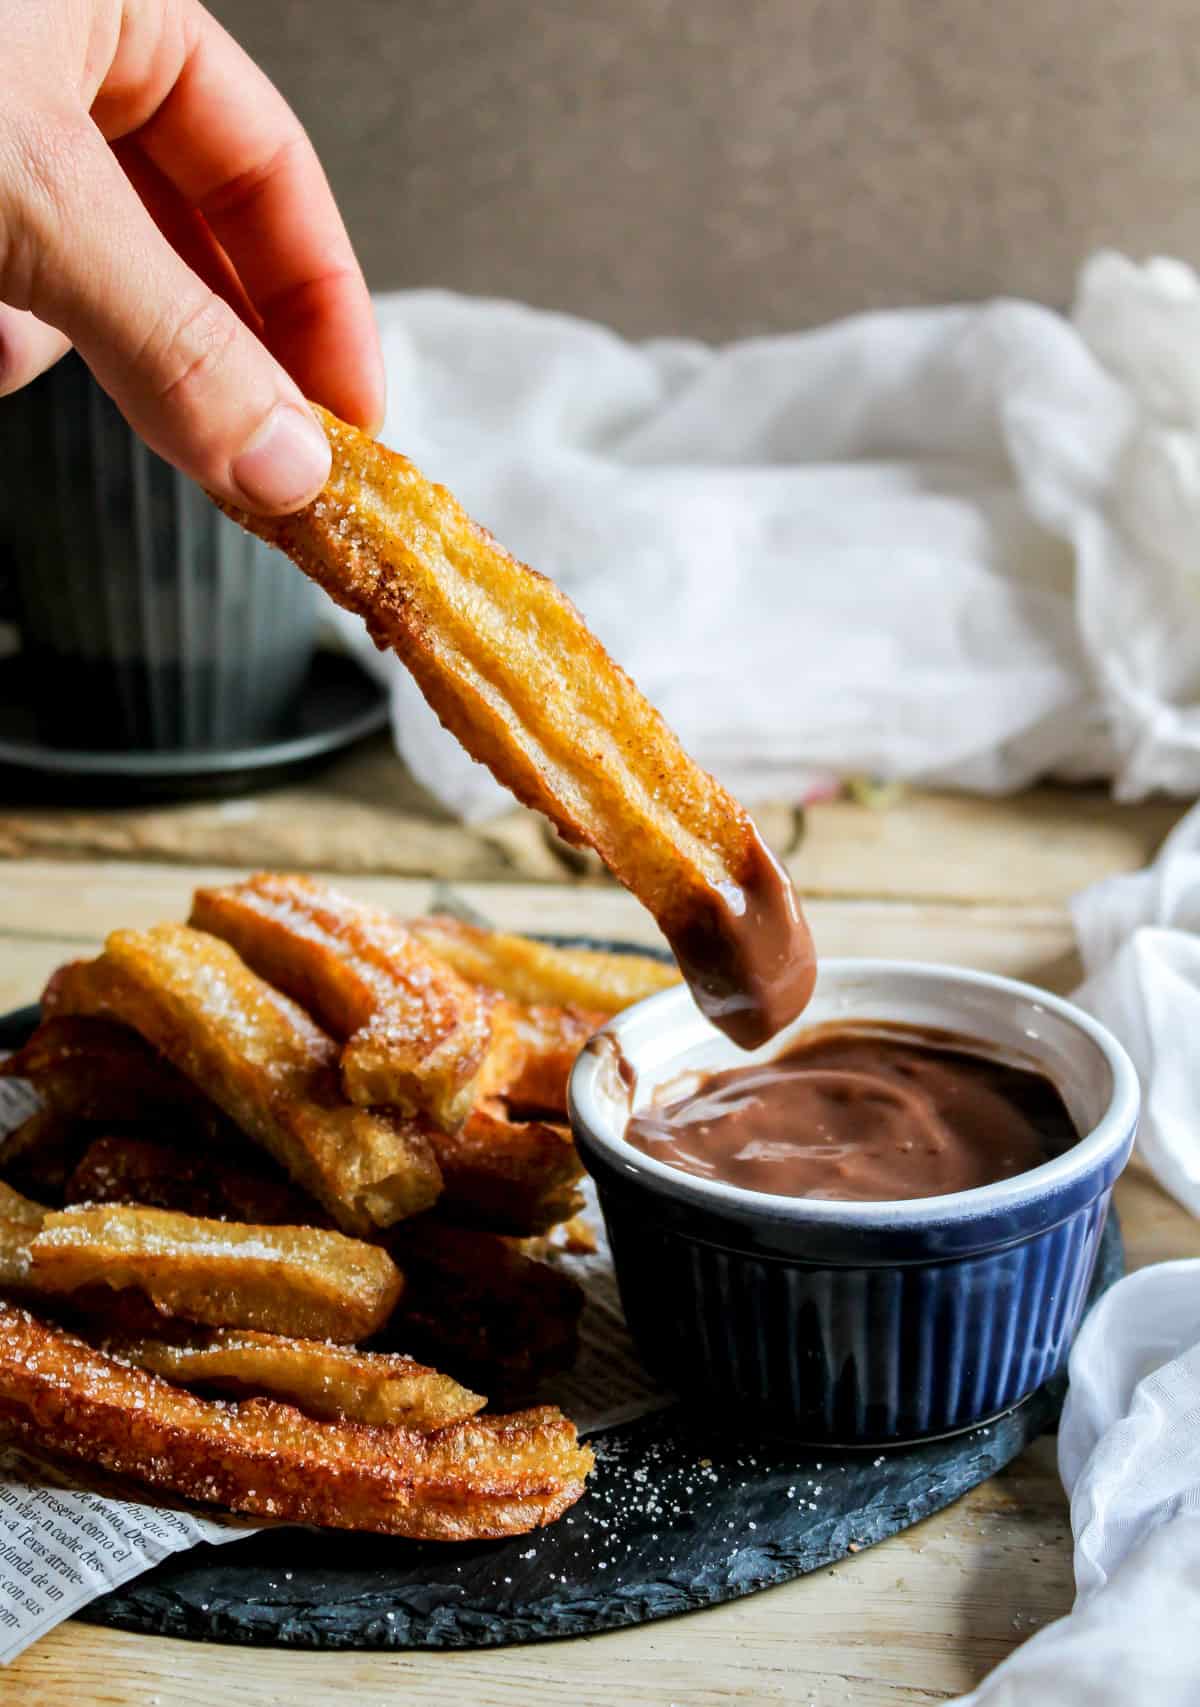 Hand holding a churro coming out of a pot of dipping sauce.